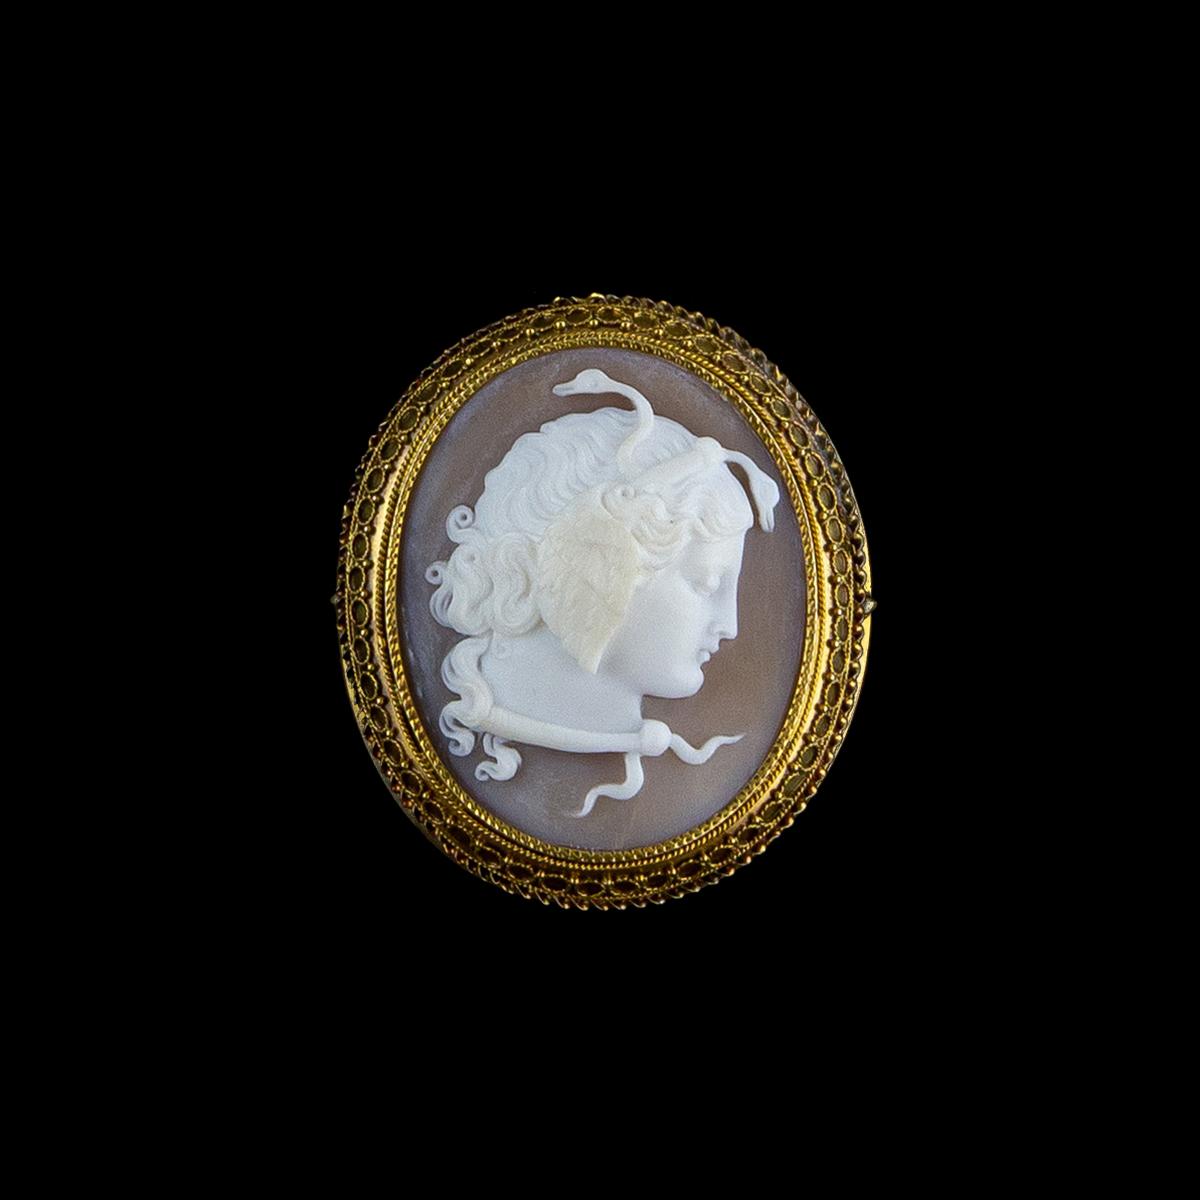 Antique brooch in 18 kt yellow gold worked frame and shell cameo depicting medusa from the first half of the 19th century. Medusa is a Greek mythical creature which means protector, guardian. 
This jewel can be worn as a brooch or as a pendant.
An